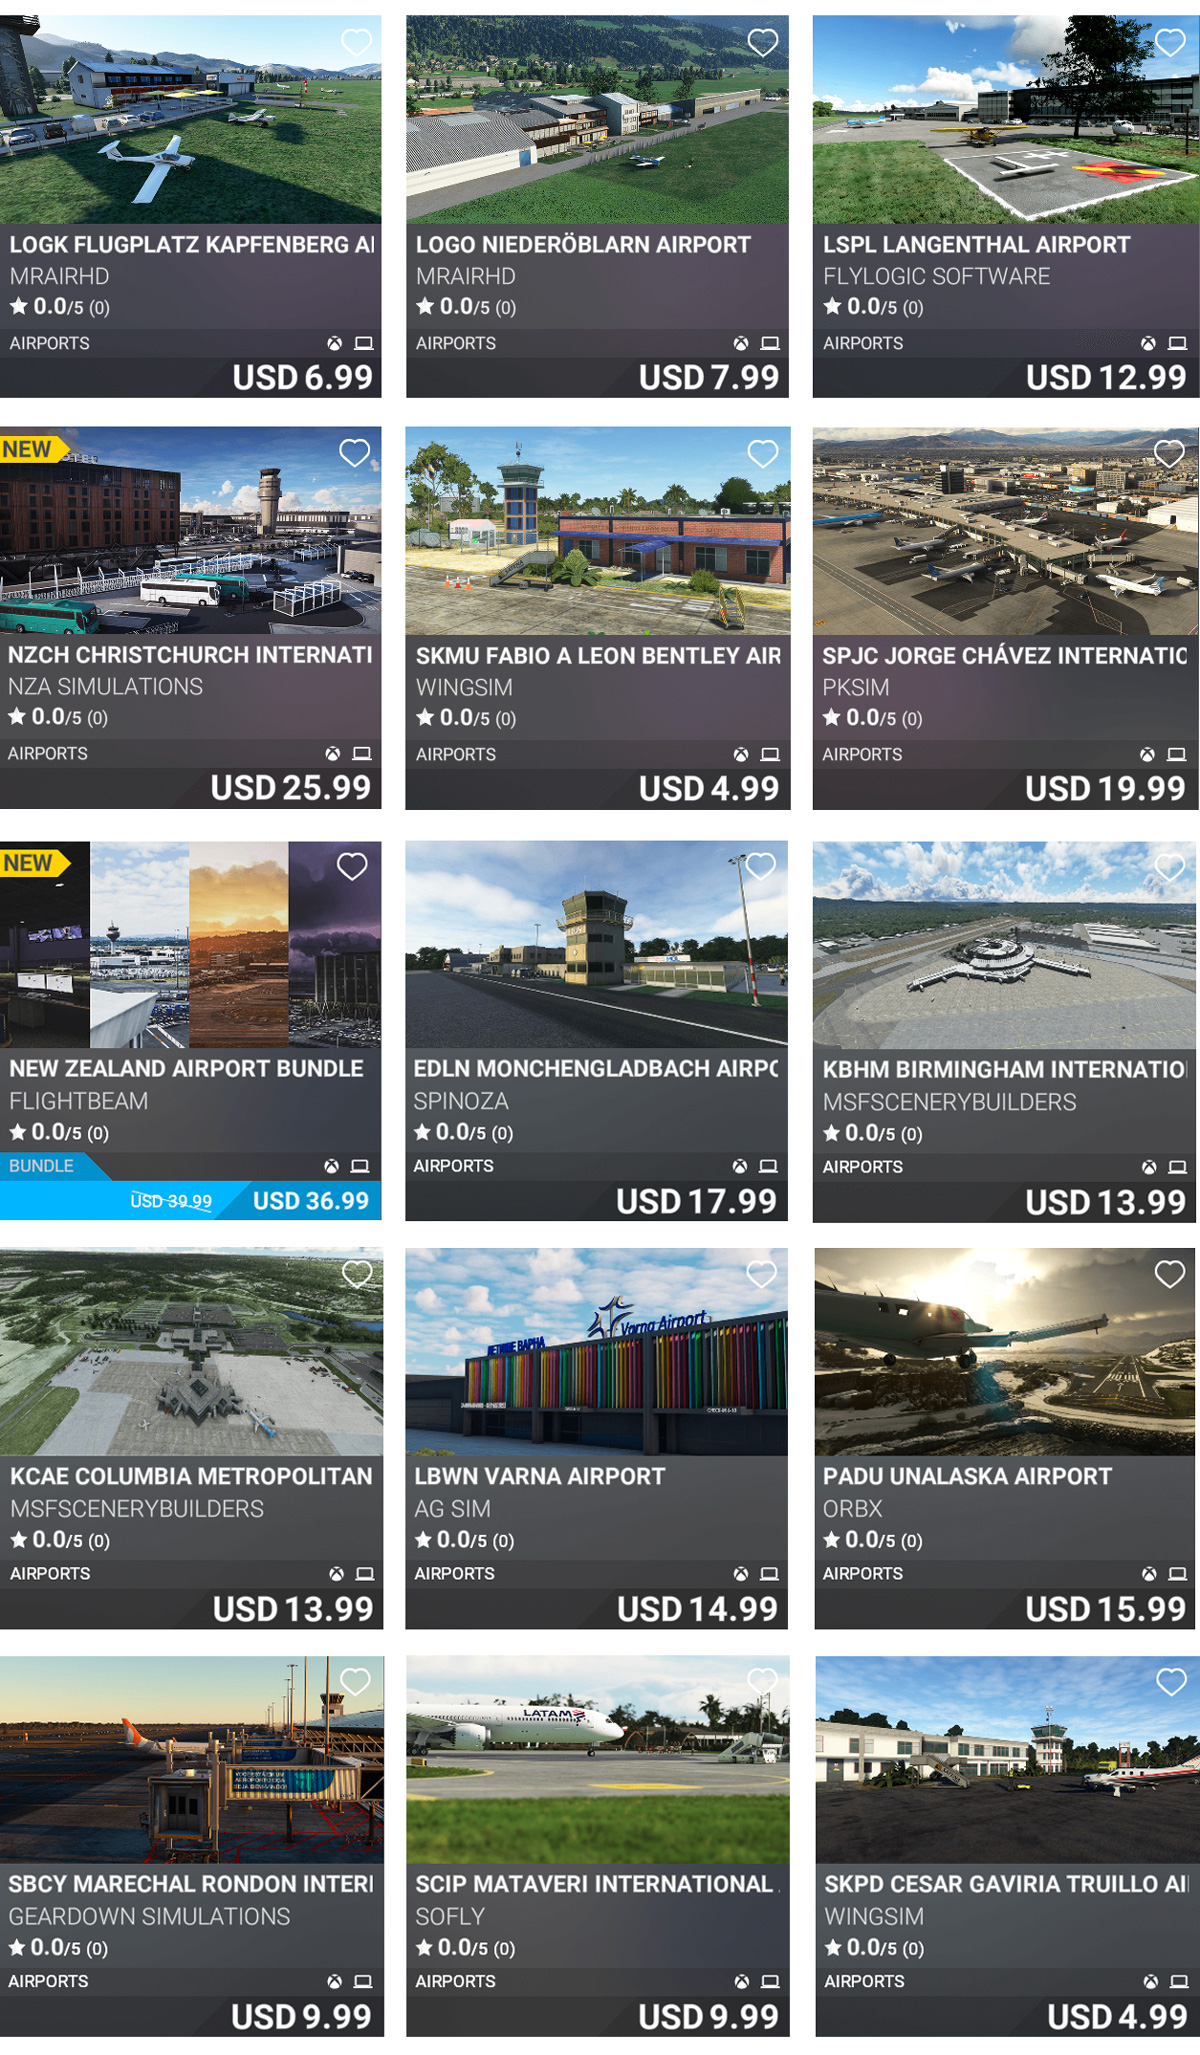 msfs marketplace update march 2023 airports